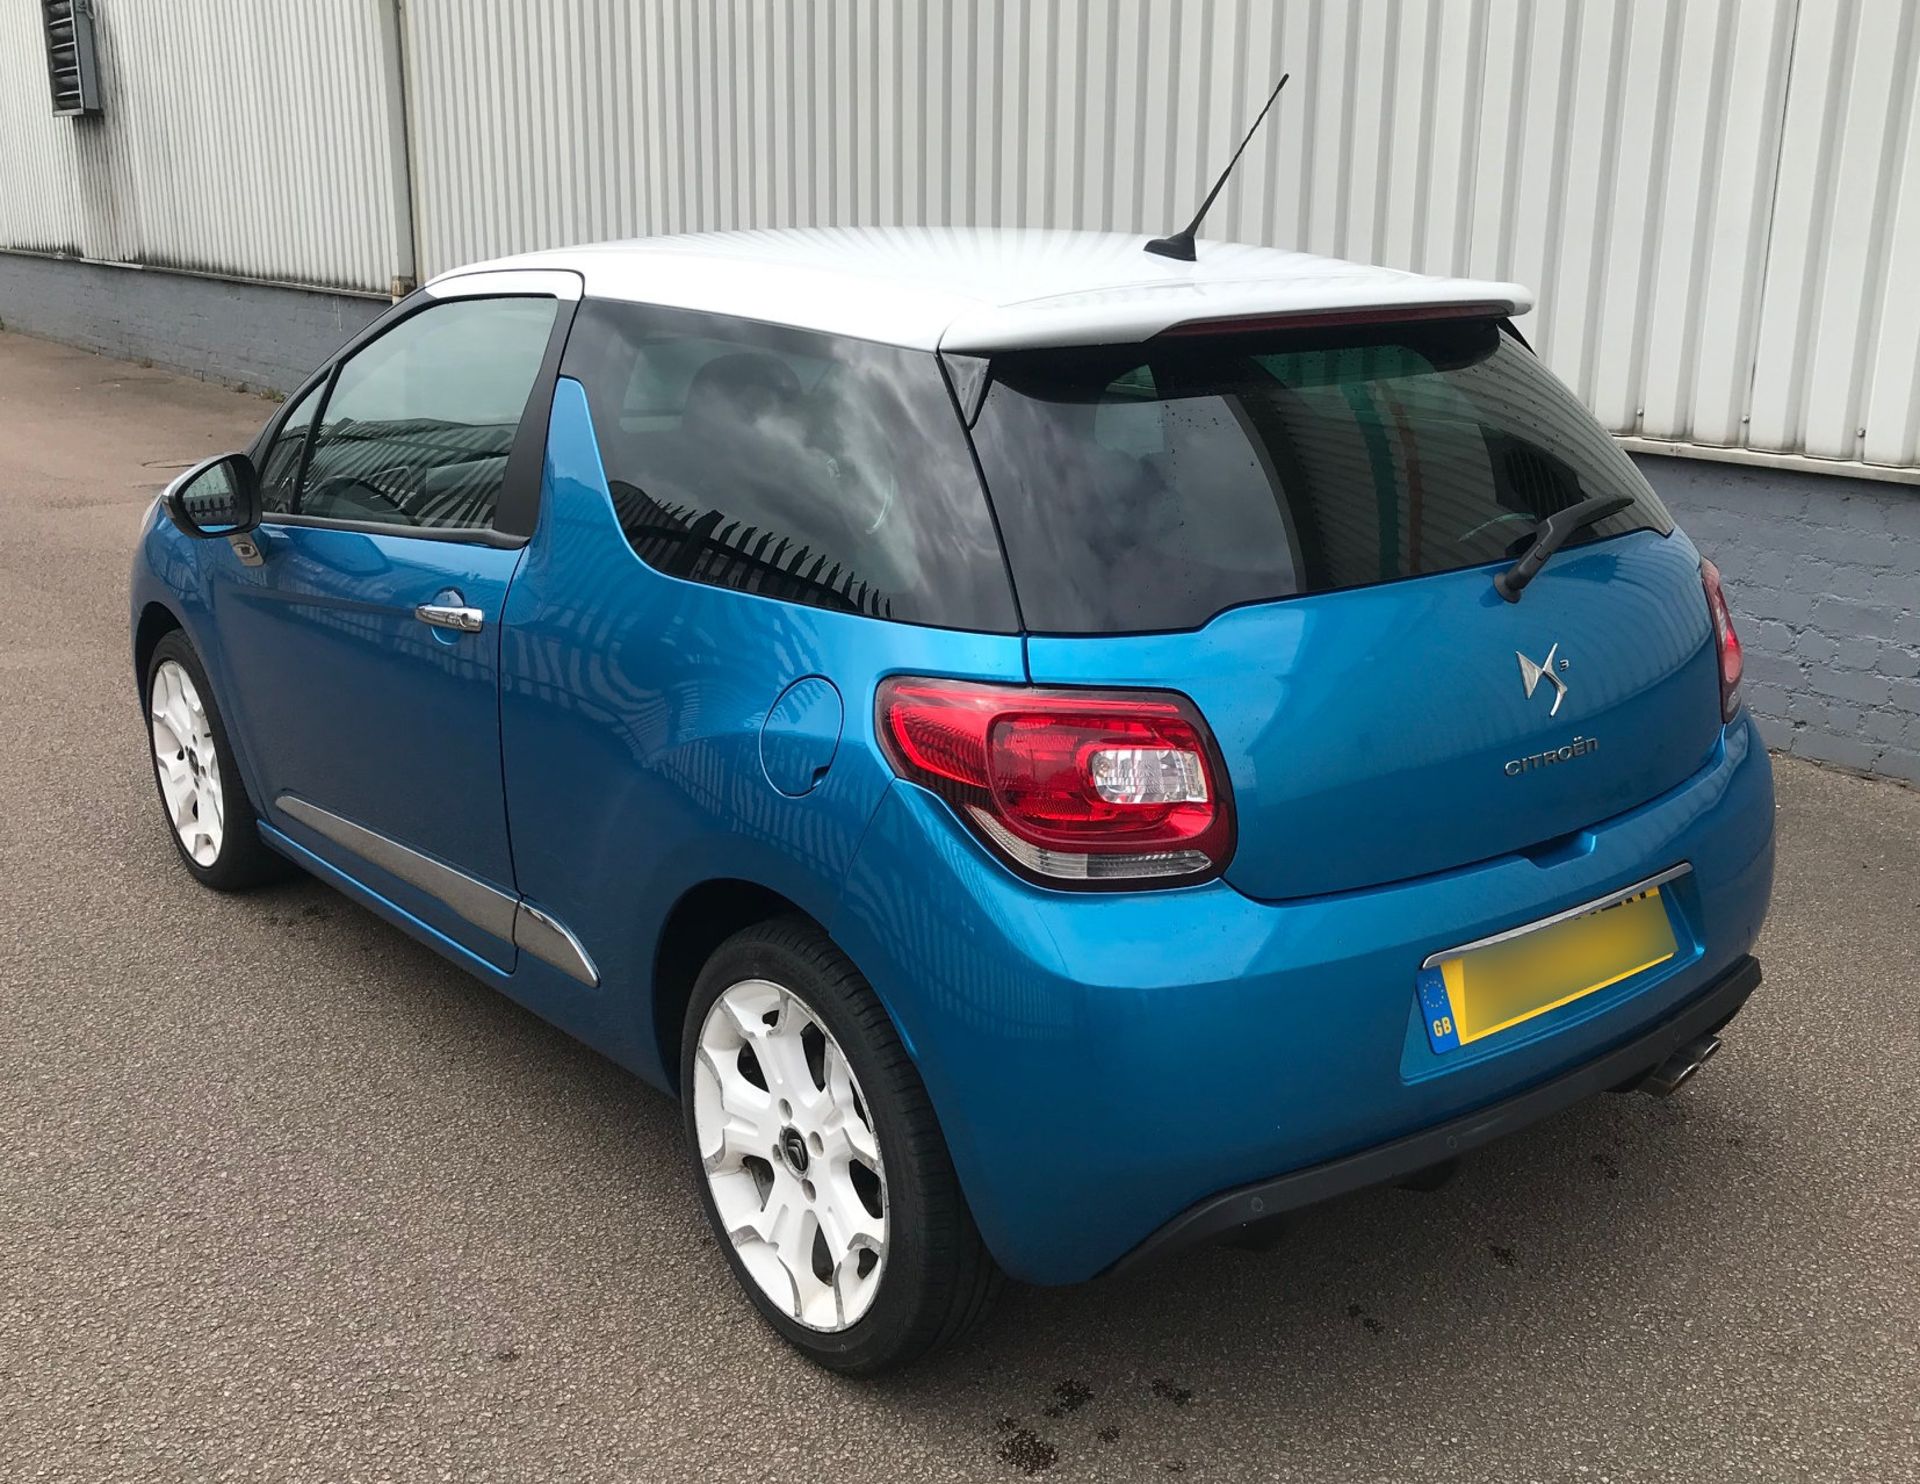 2013 Citroen DS3 1.6 e-HDi 110 Airdream DSport Plus 3dr Hatchback - CL505 - NO VAT ON THE HAMMER - Image 3 of 15